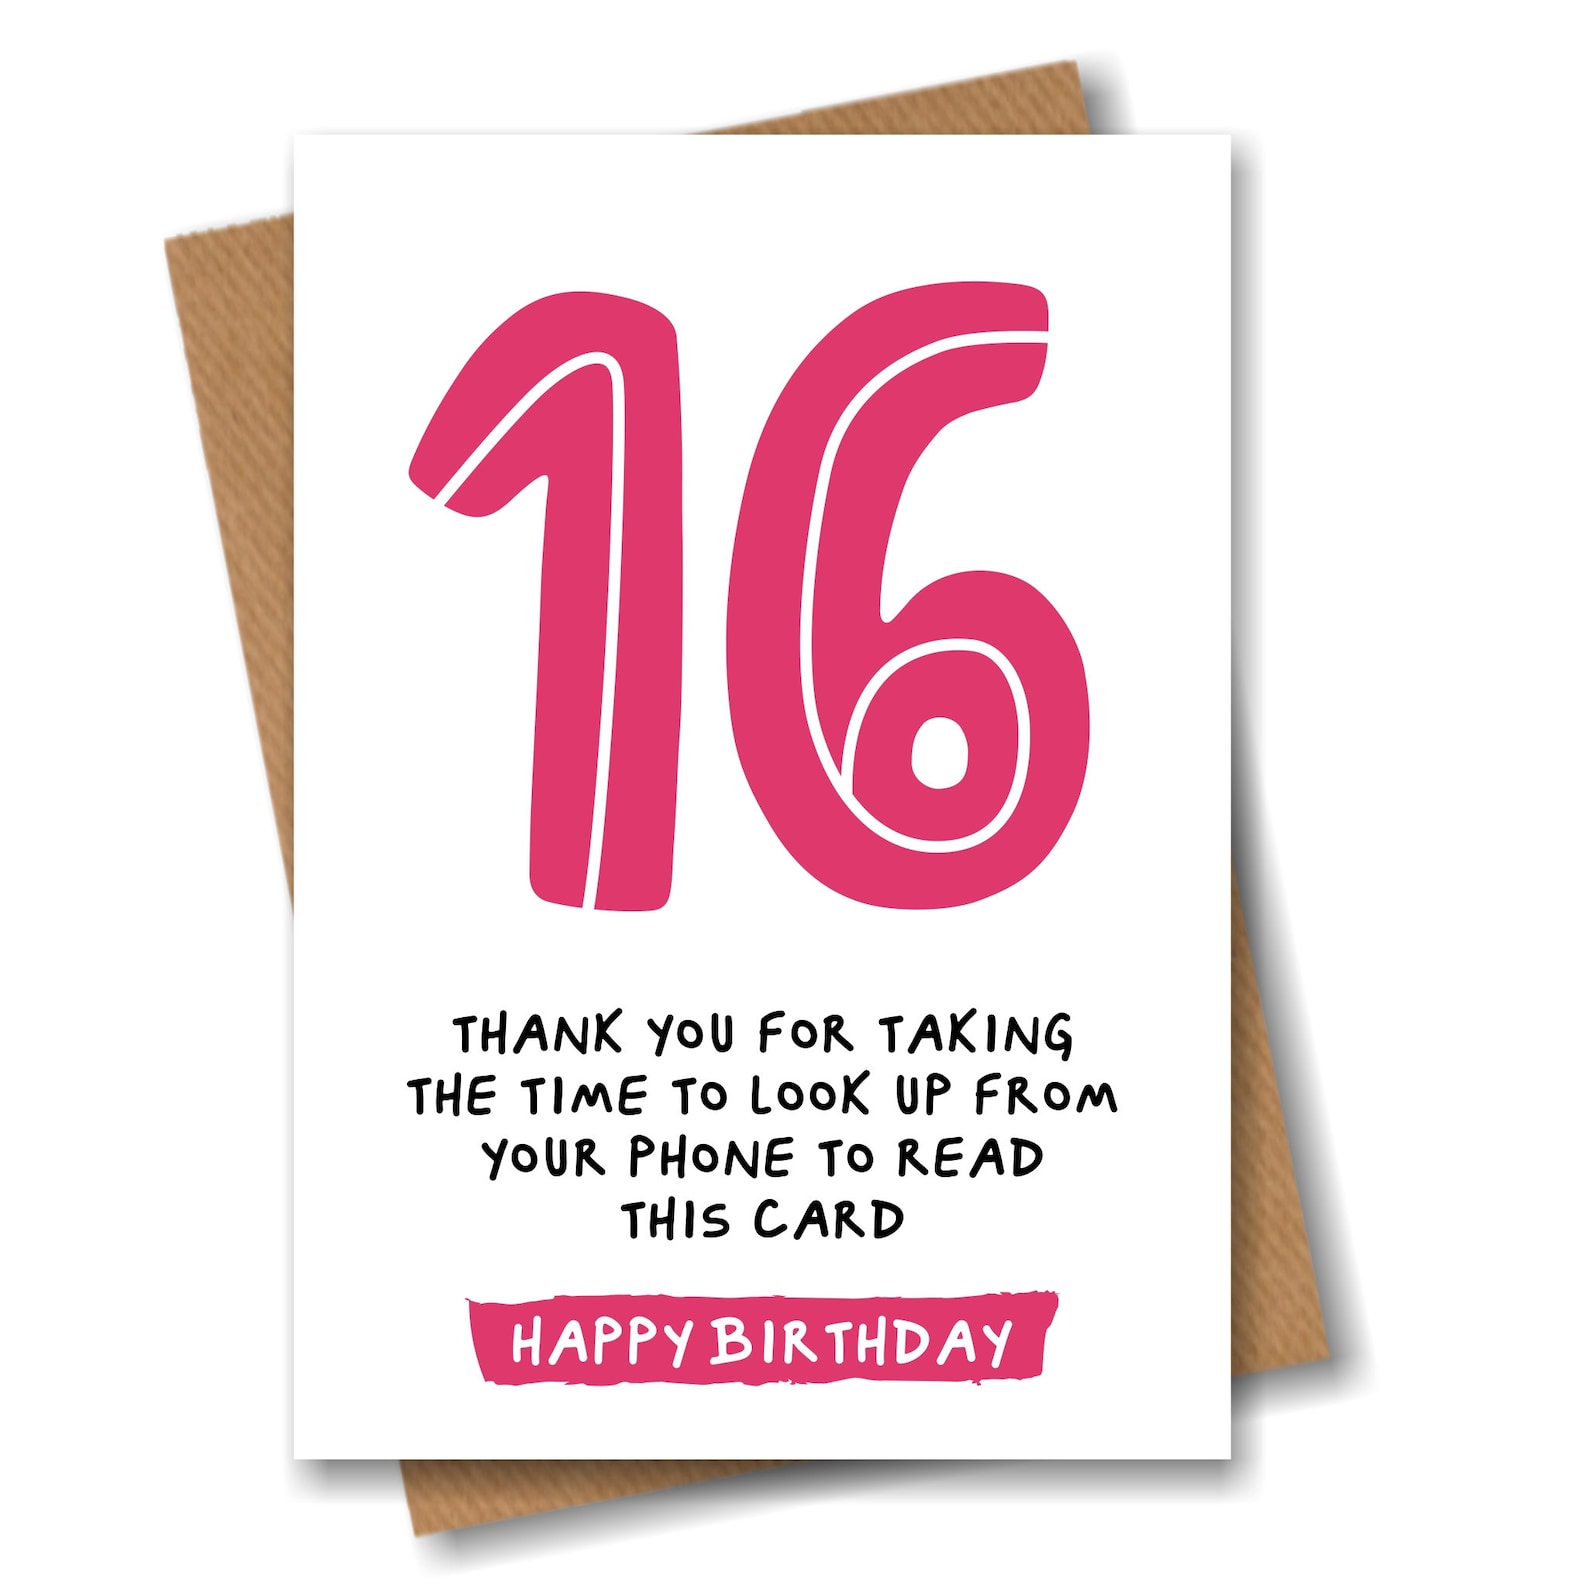 16th Birthday Card Funny Joke For 16 Year Old Etsy Uk